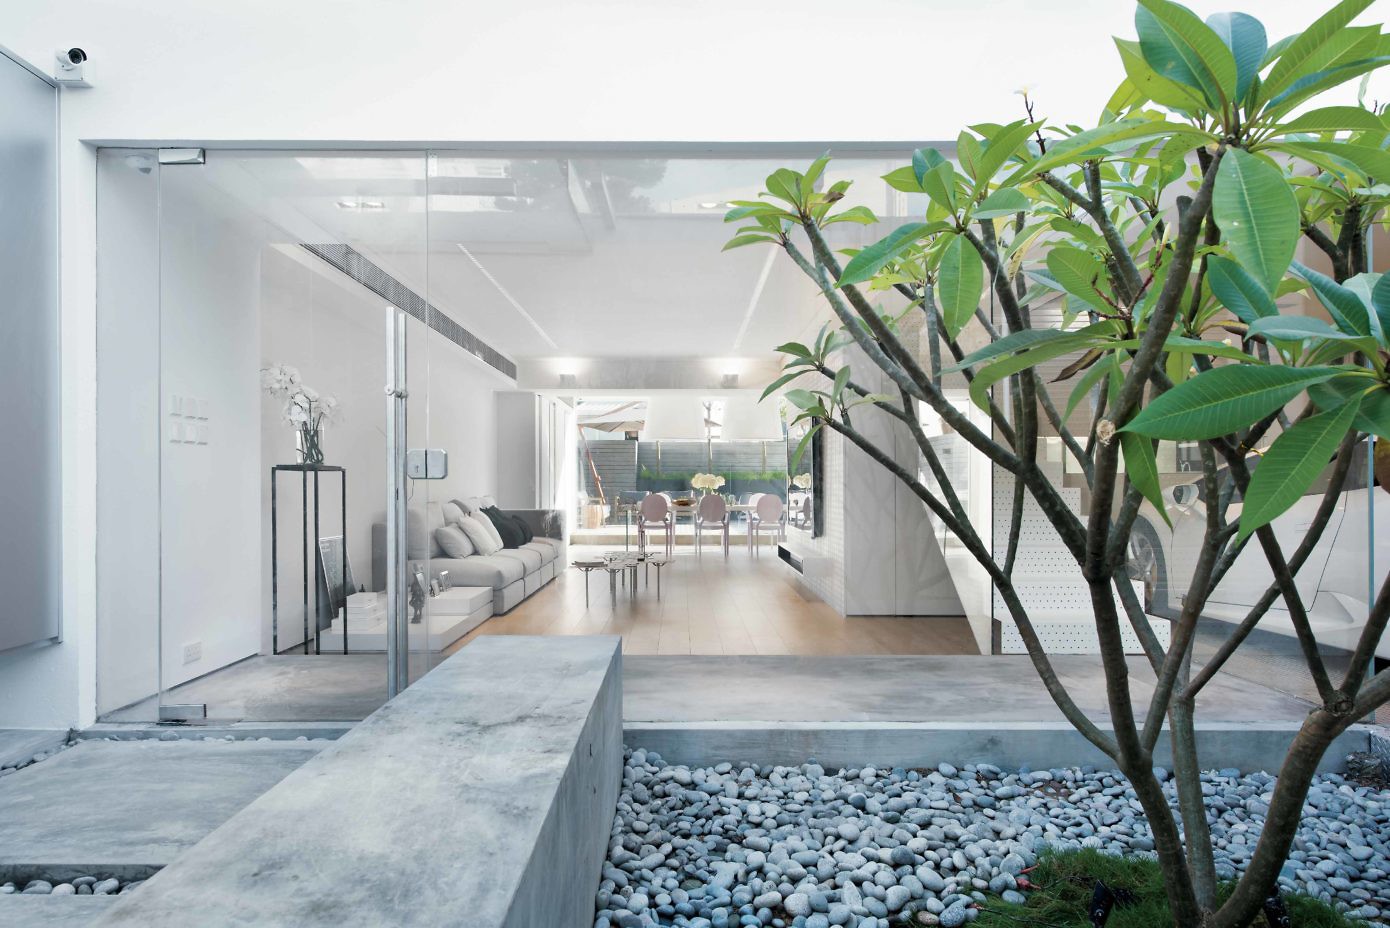 House in Hong Kong by Millimeter Interior Design